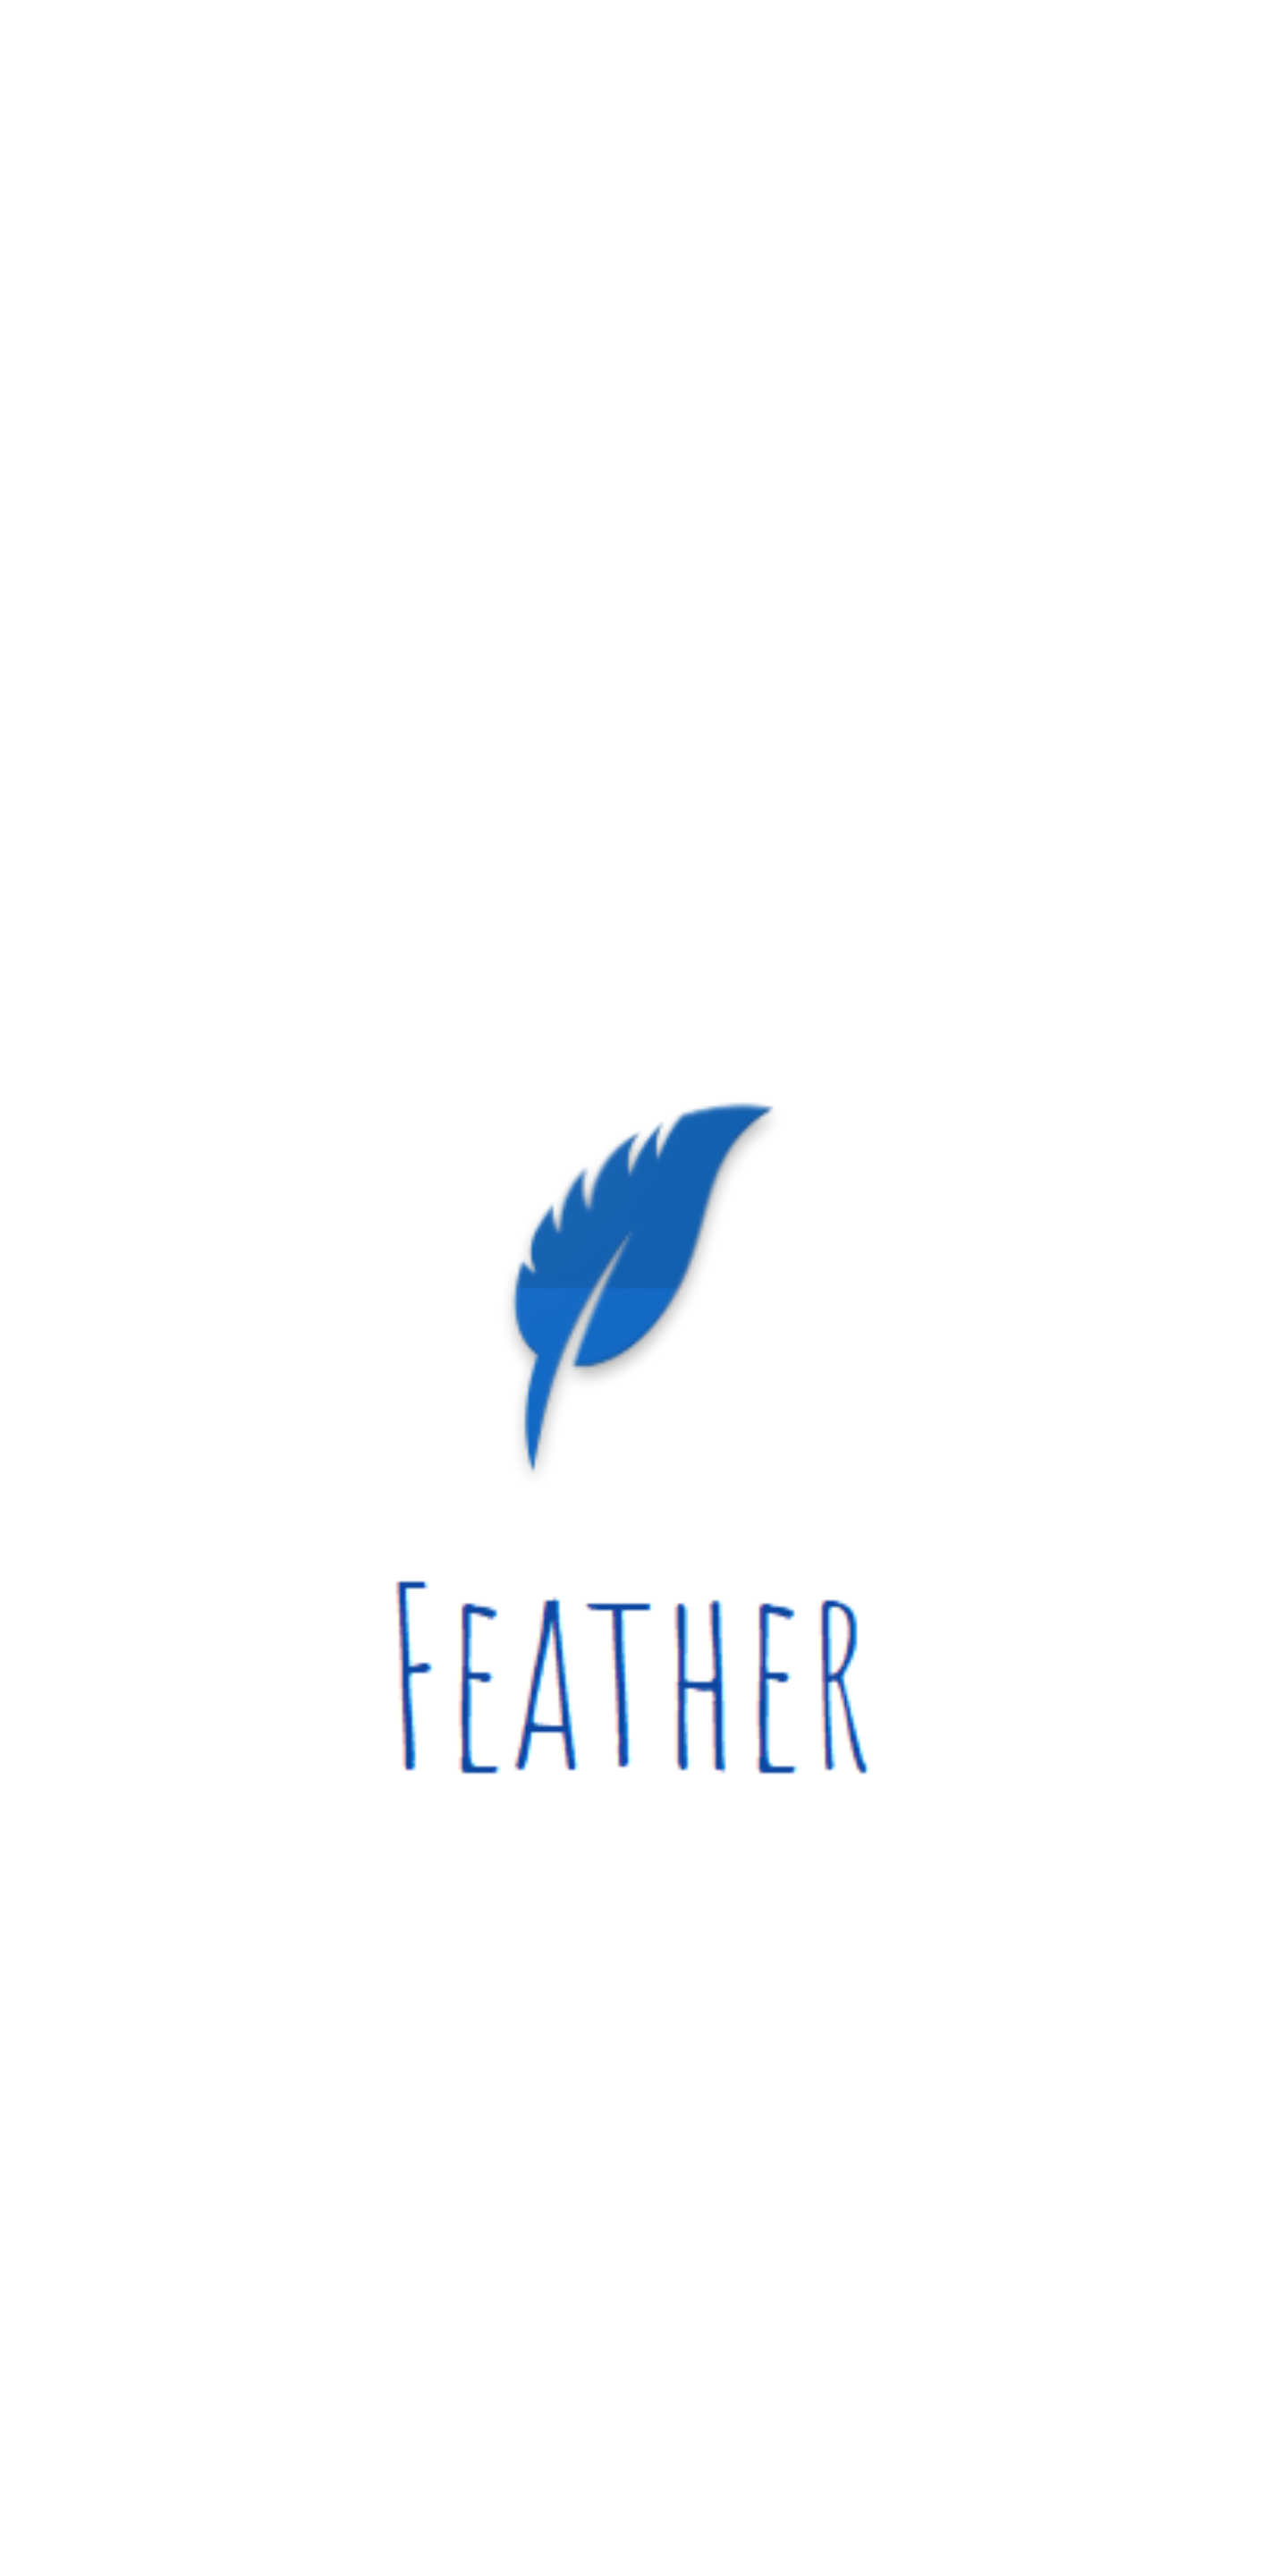 Flutter weather application with beautiful UI and UX